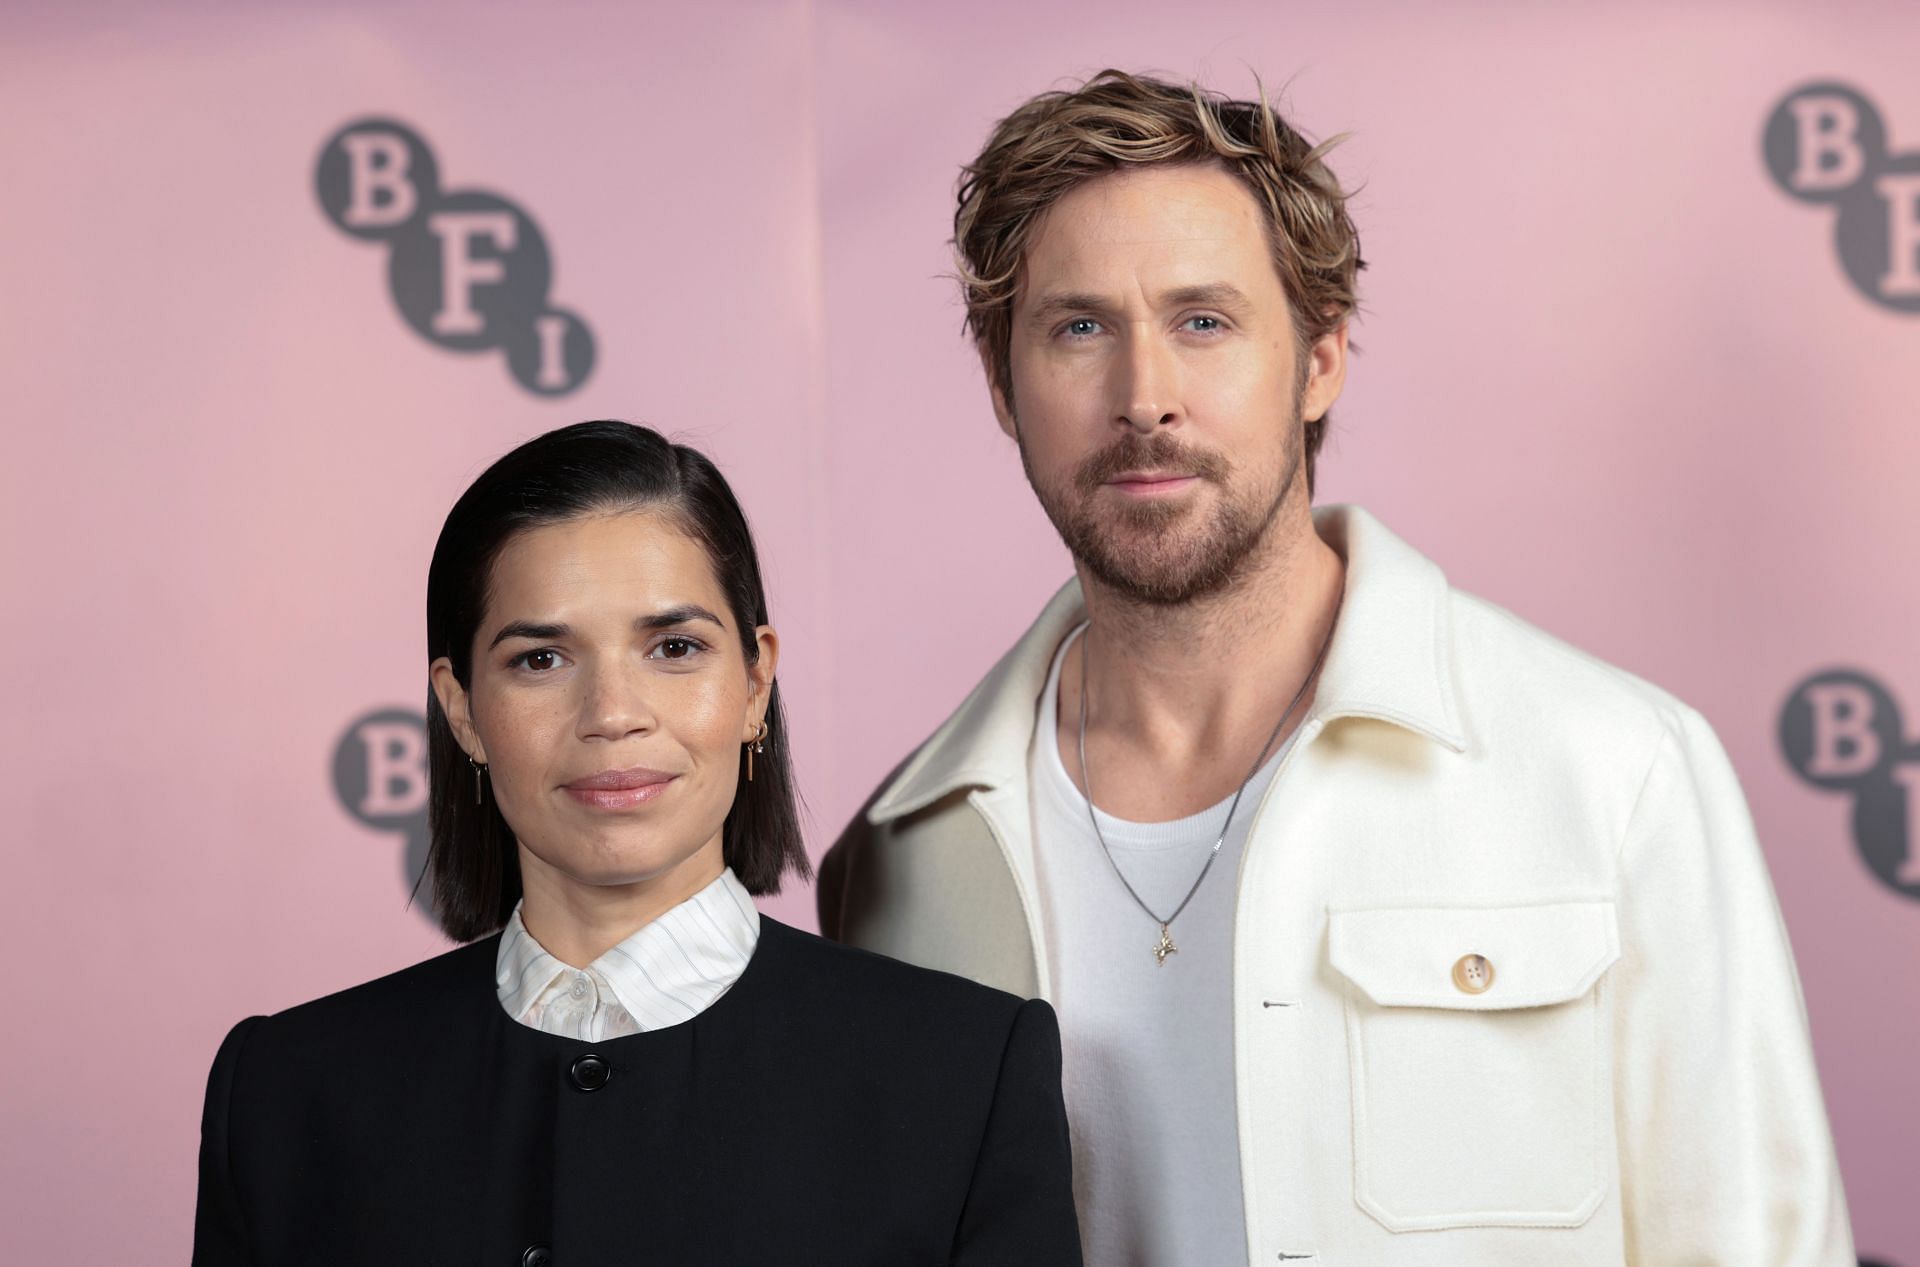 Both Gosling and Ferrera have expressed their discontent over Barbie&#039;s major misses at the Oscars (Image via Getty)